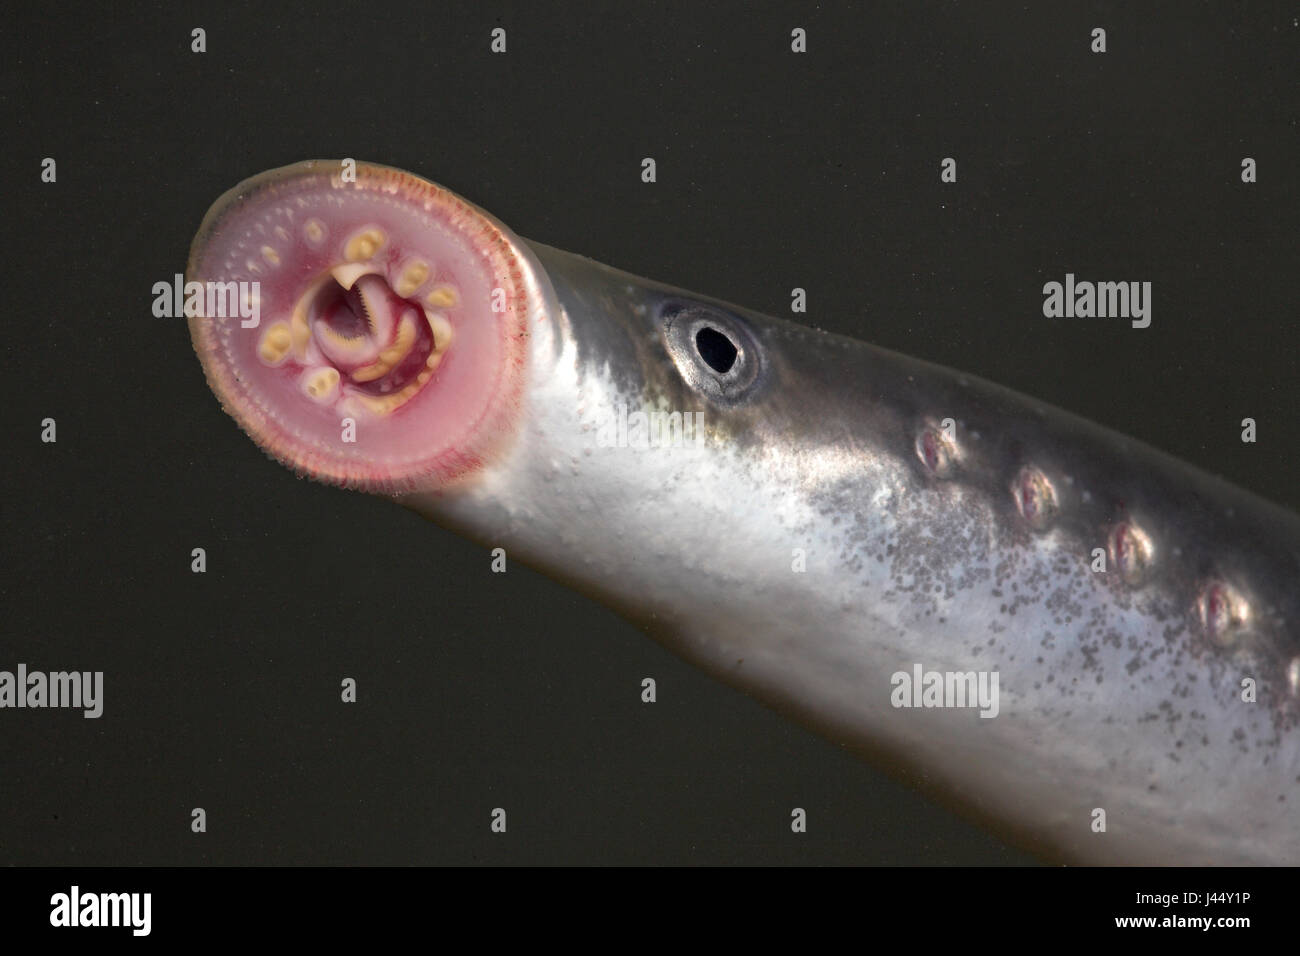 horizontal picture of a river lamprey with its suckerdisc well visible Stock Photo